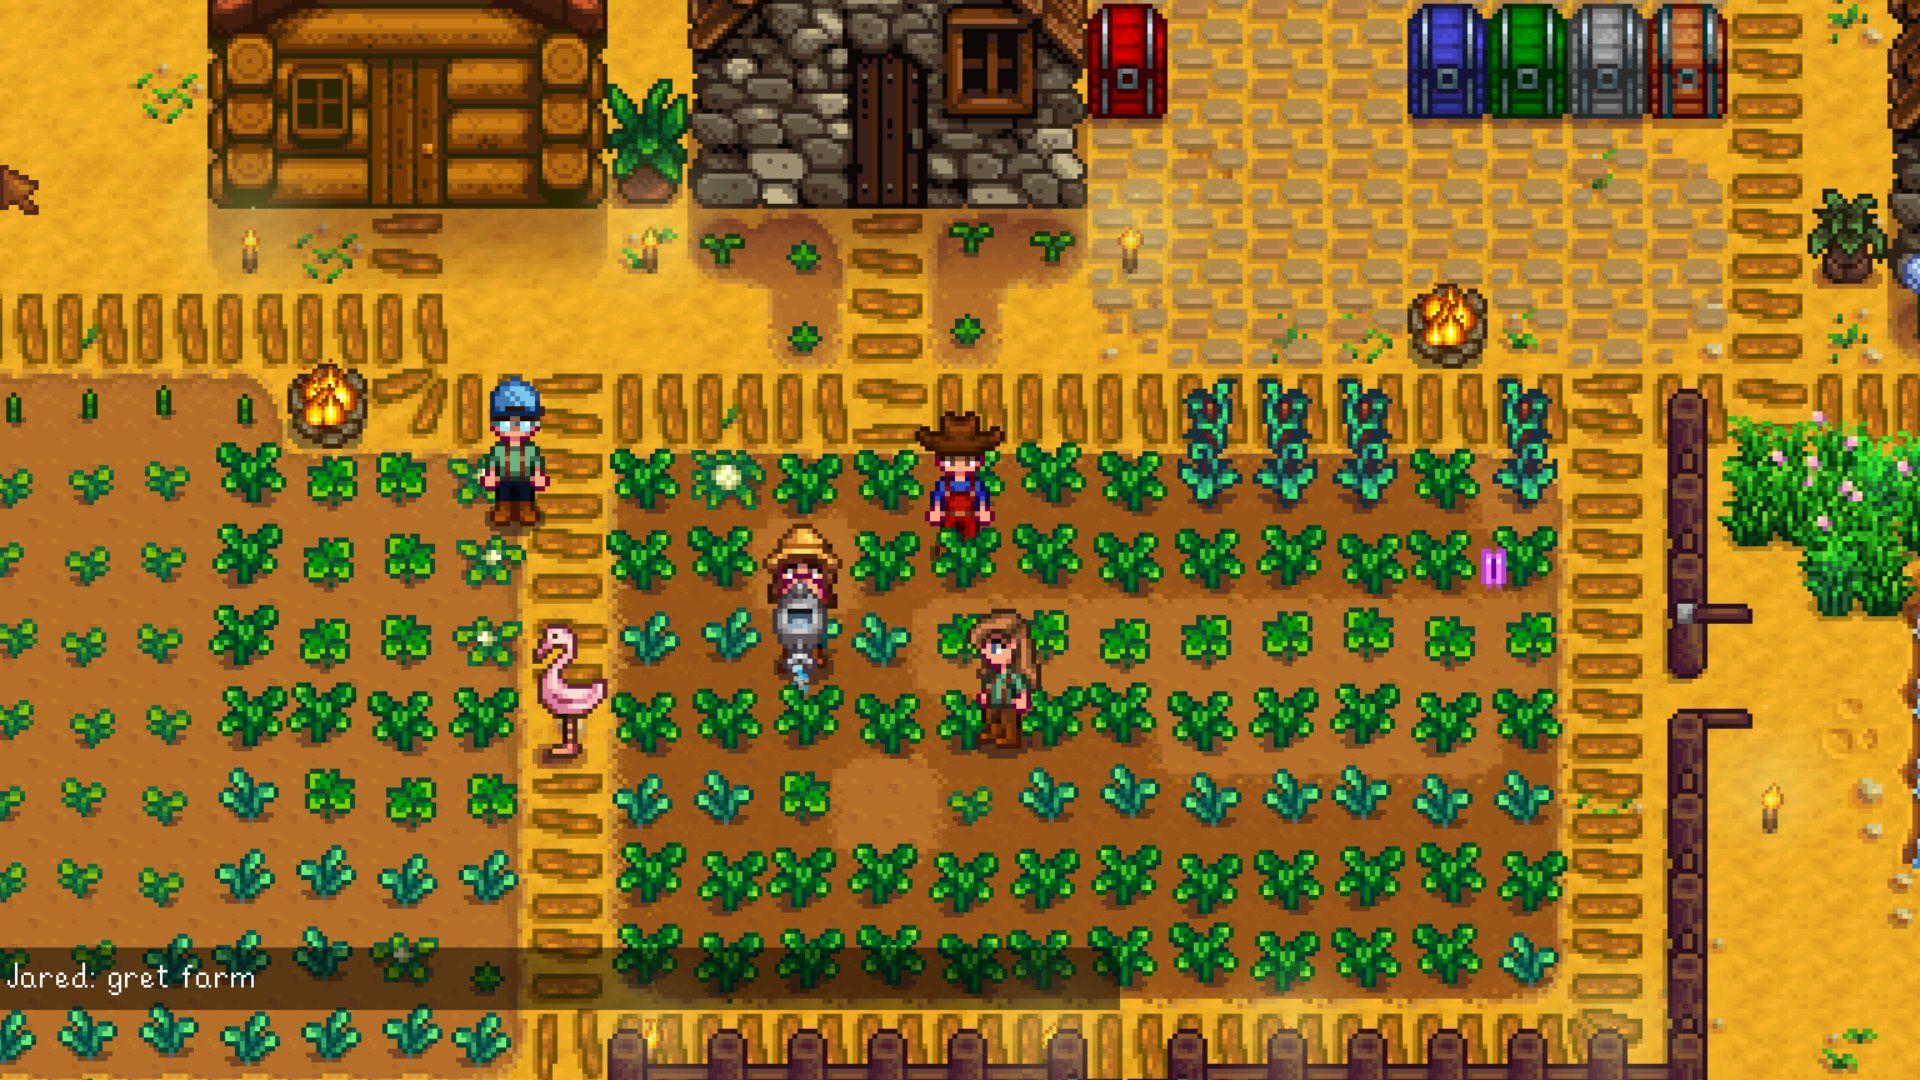 Stardew Valley Multiplayer In About A Month Says Developer